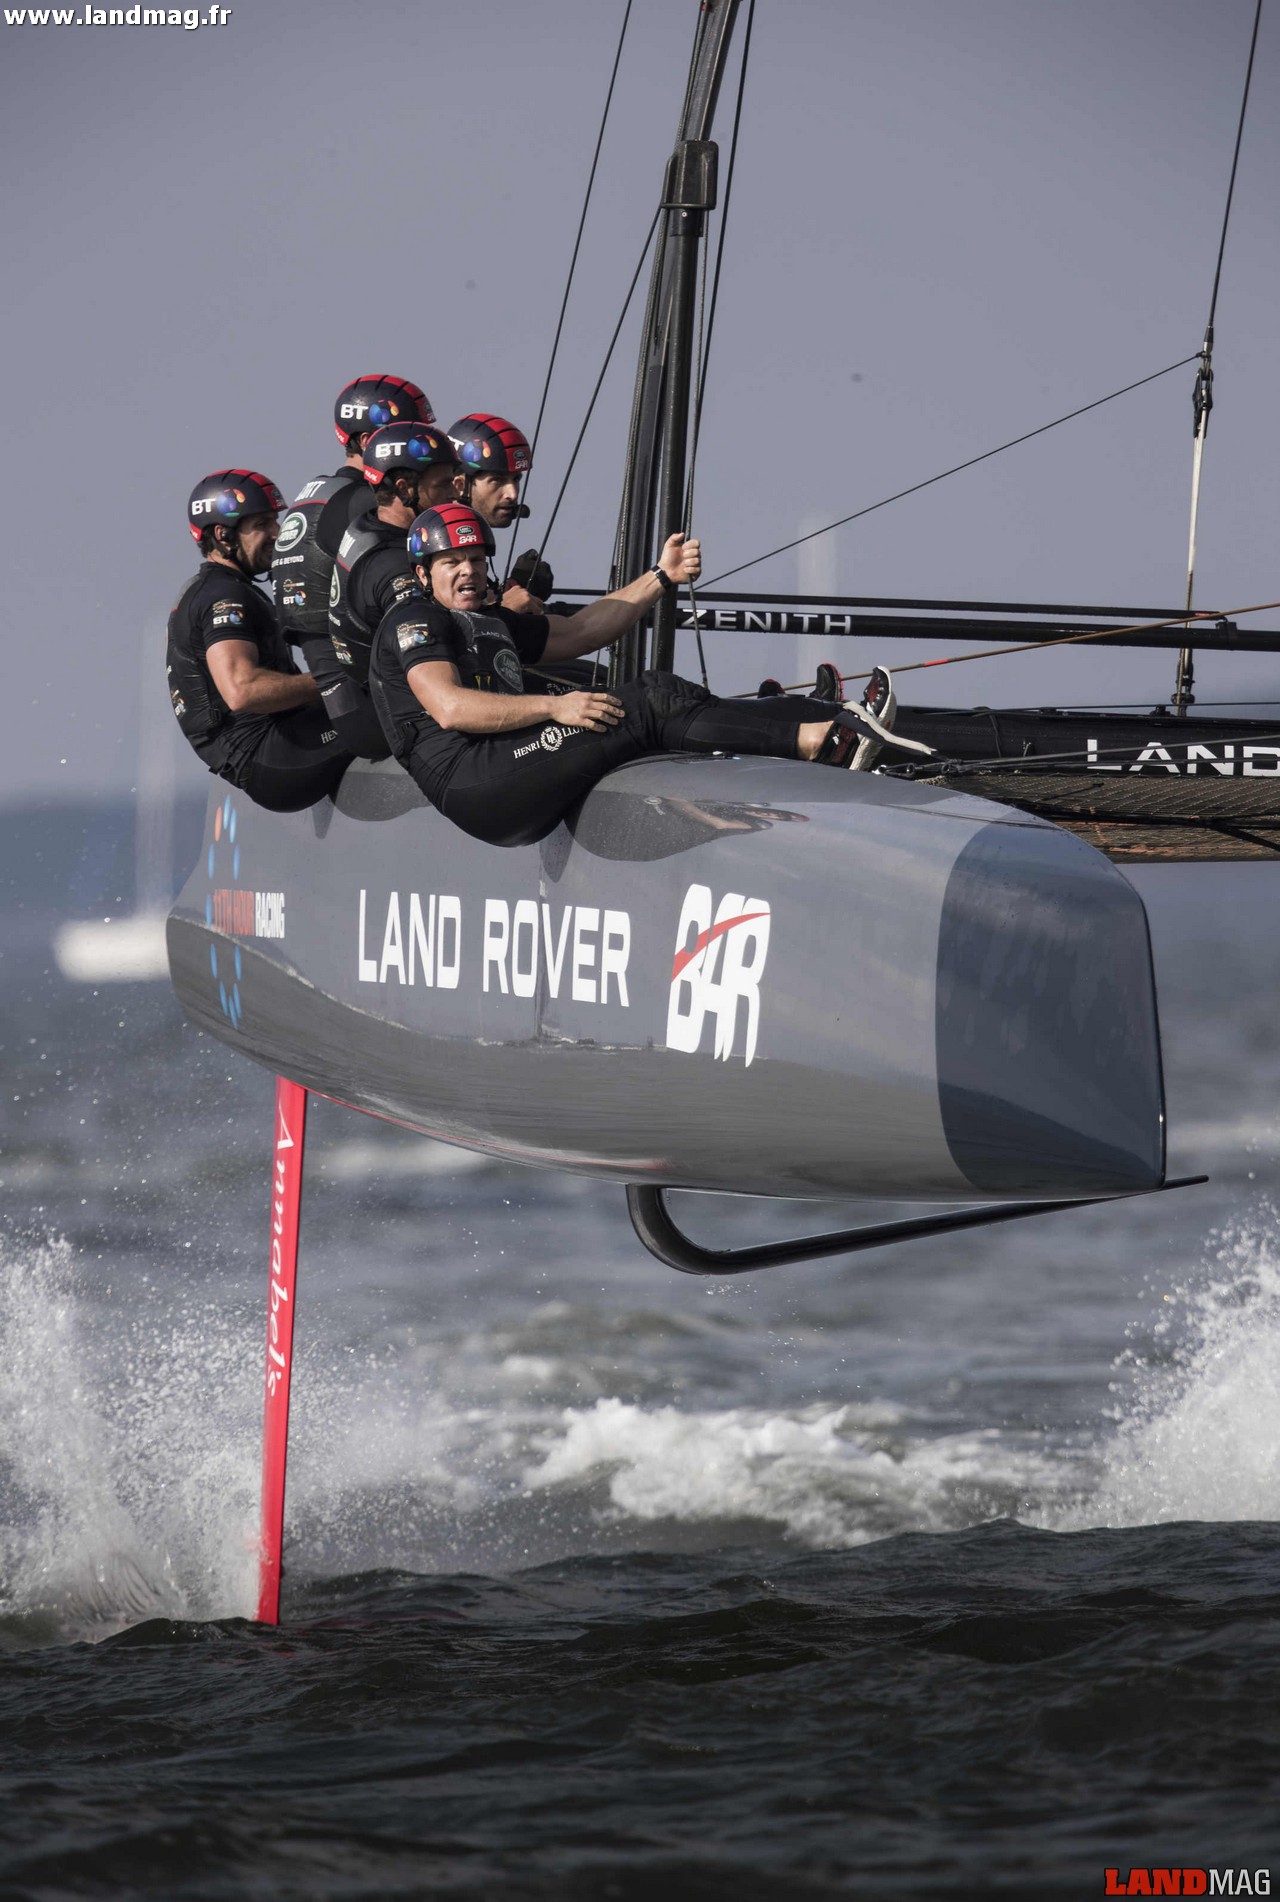 FUKUOKA, JAPAN - November 19: The LandRover BAR British Americas Cup Team skippered by ben Ainslie. The Louis Vuitton Americas Cup World Series Japan on November 19, 2016 in Fukuoka, Japan Photo by Lloyd Images